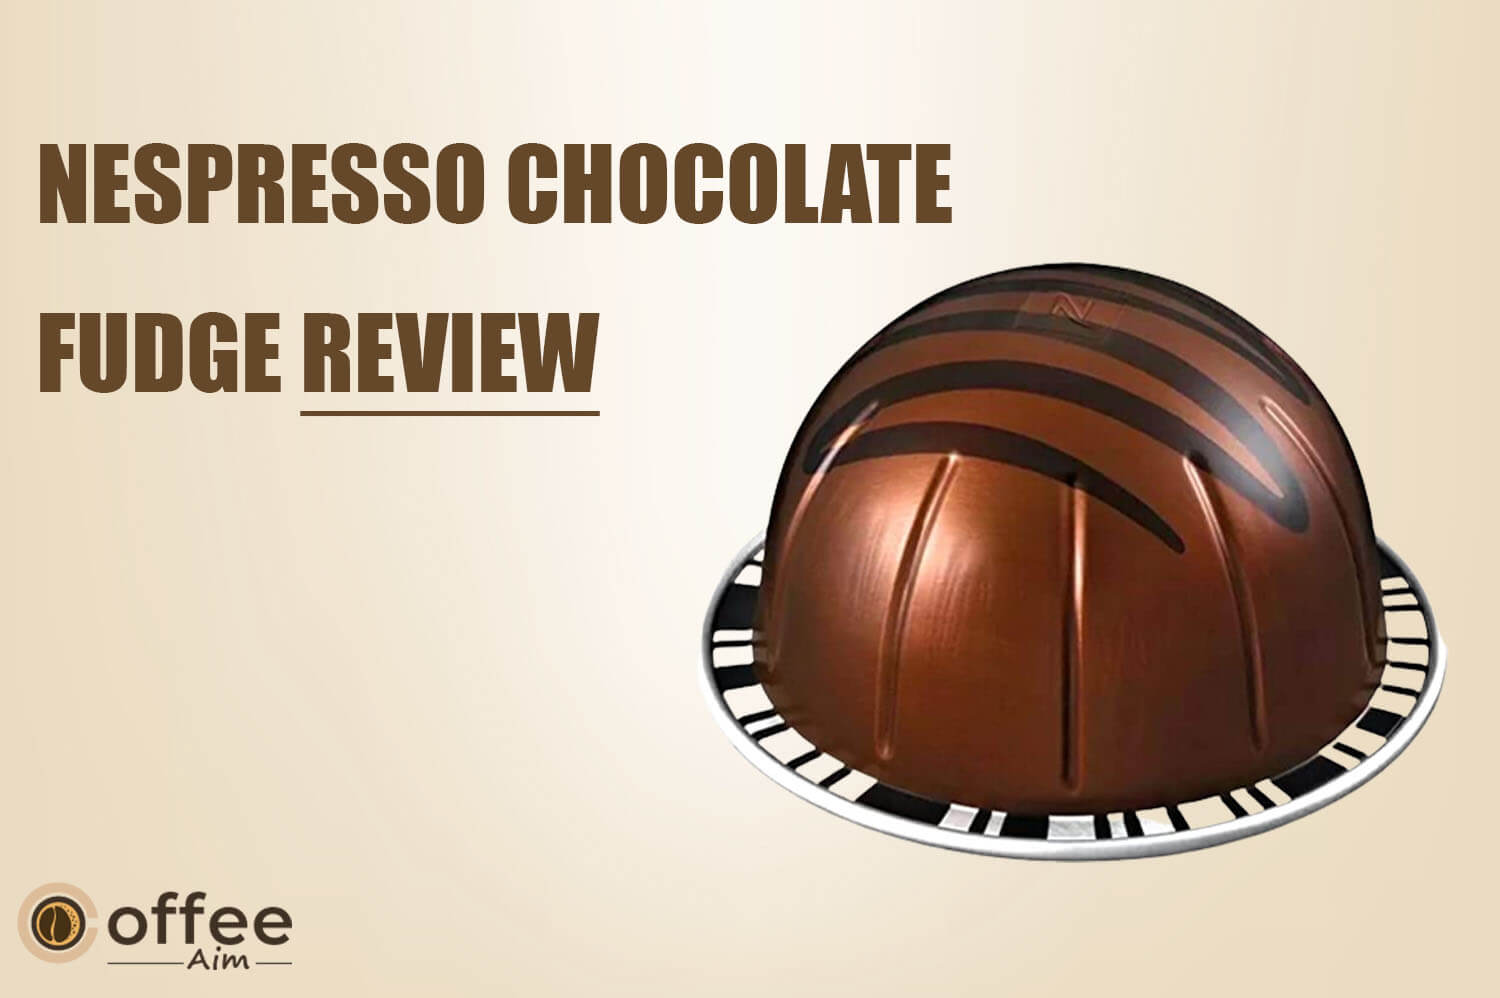 Featured image for the article "Nespresso chocolate fudge review"